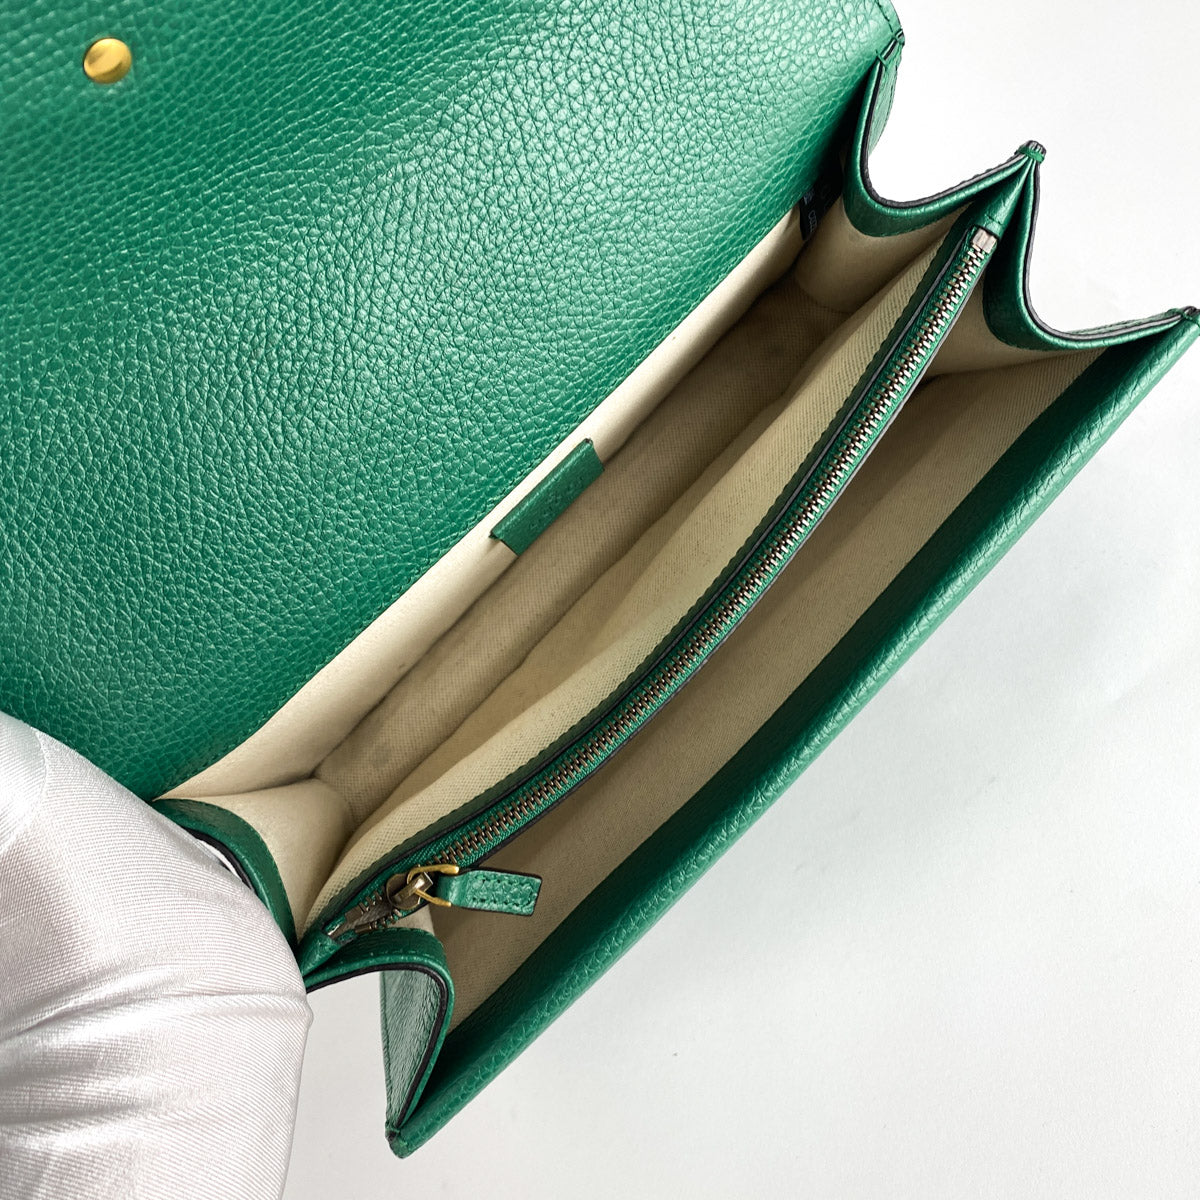 Gucci Small Dionysus Blooms Leather Shoulder Bag in Green –